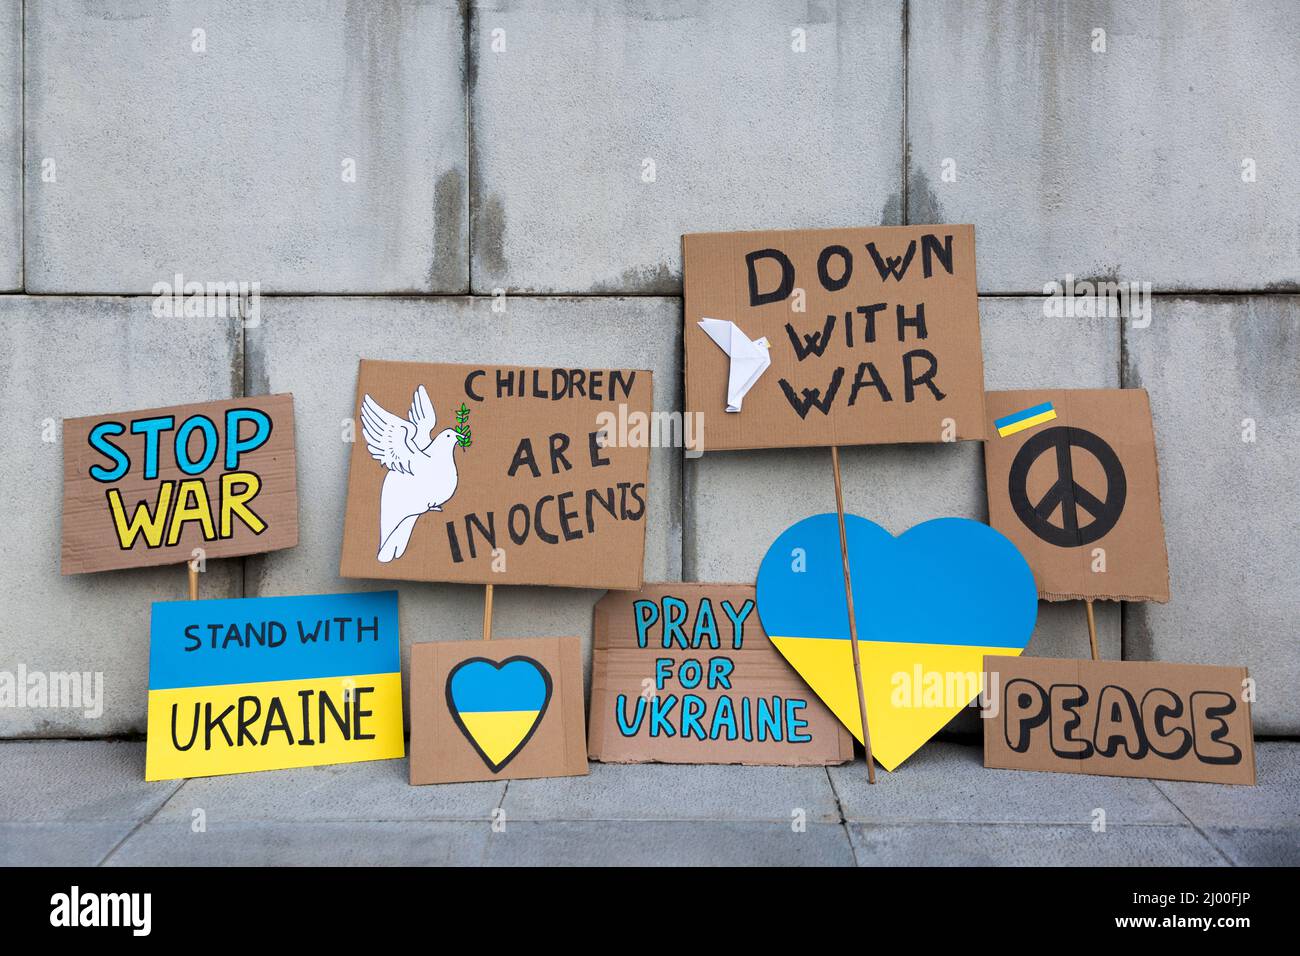 Different posters with messages against Russia's war with Ukraine isolated on a wall. No people. Concept of solidarity and support for the Ukrainian p Stock Photo